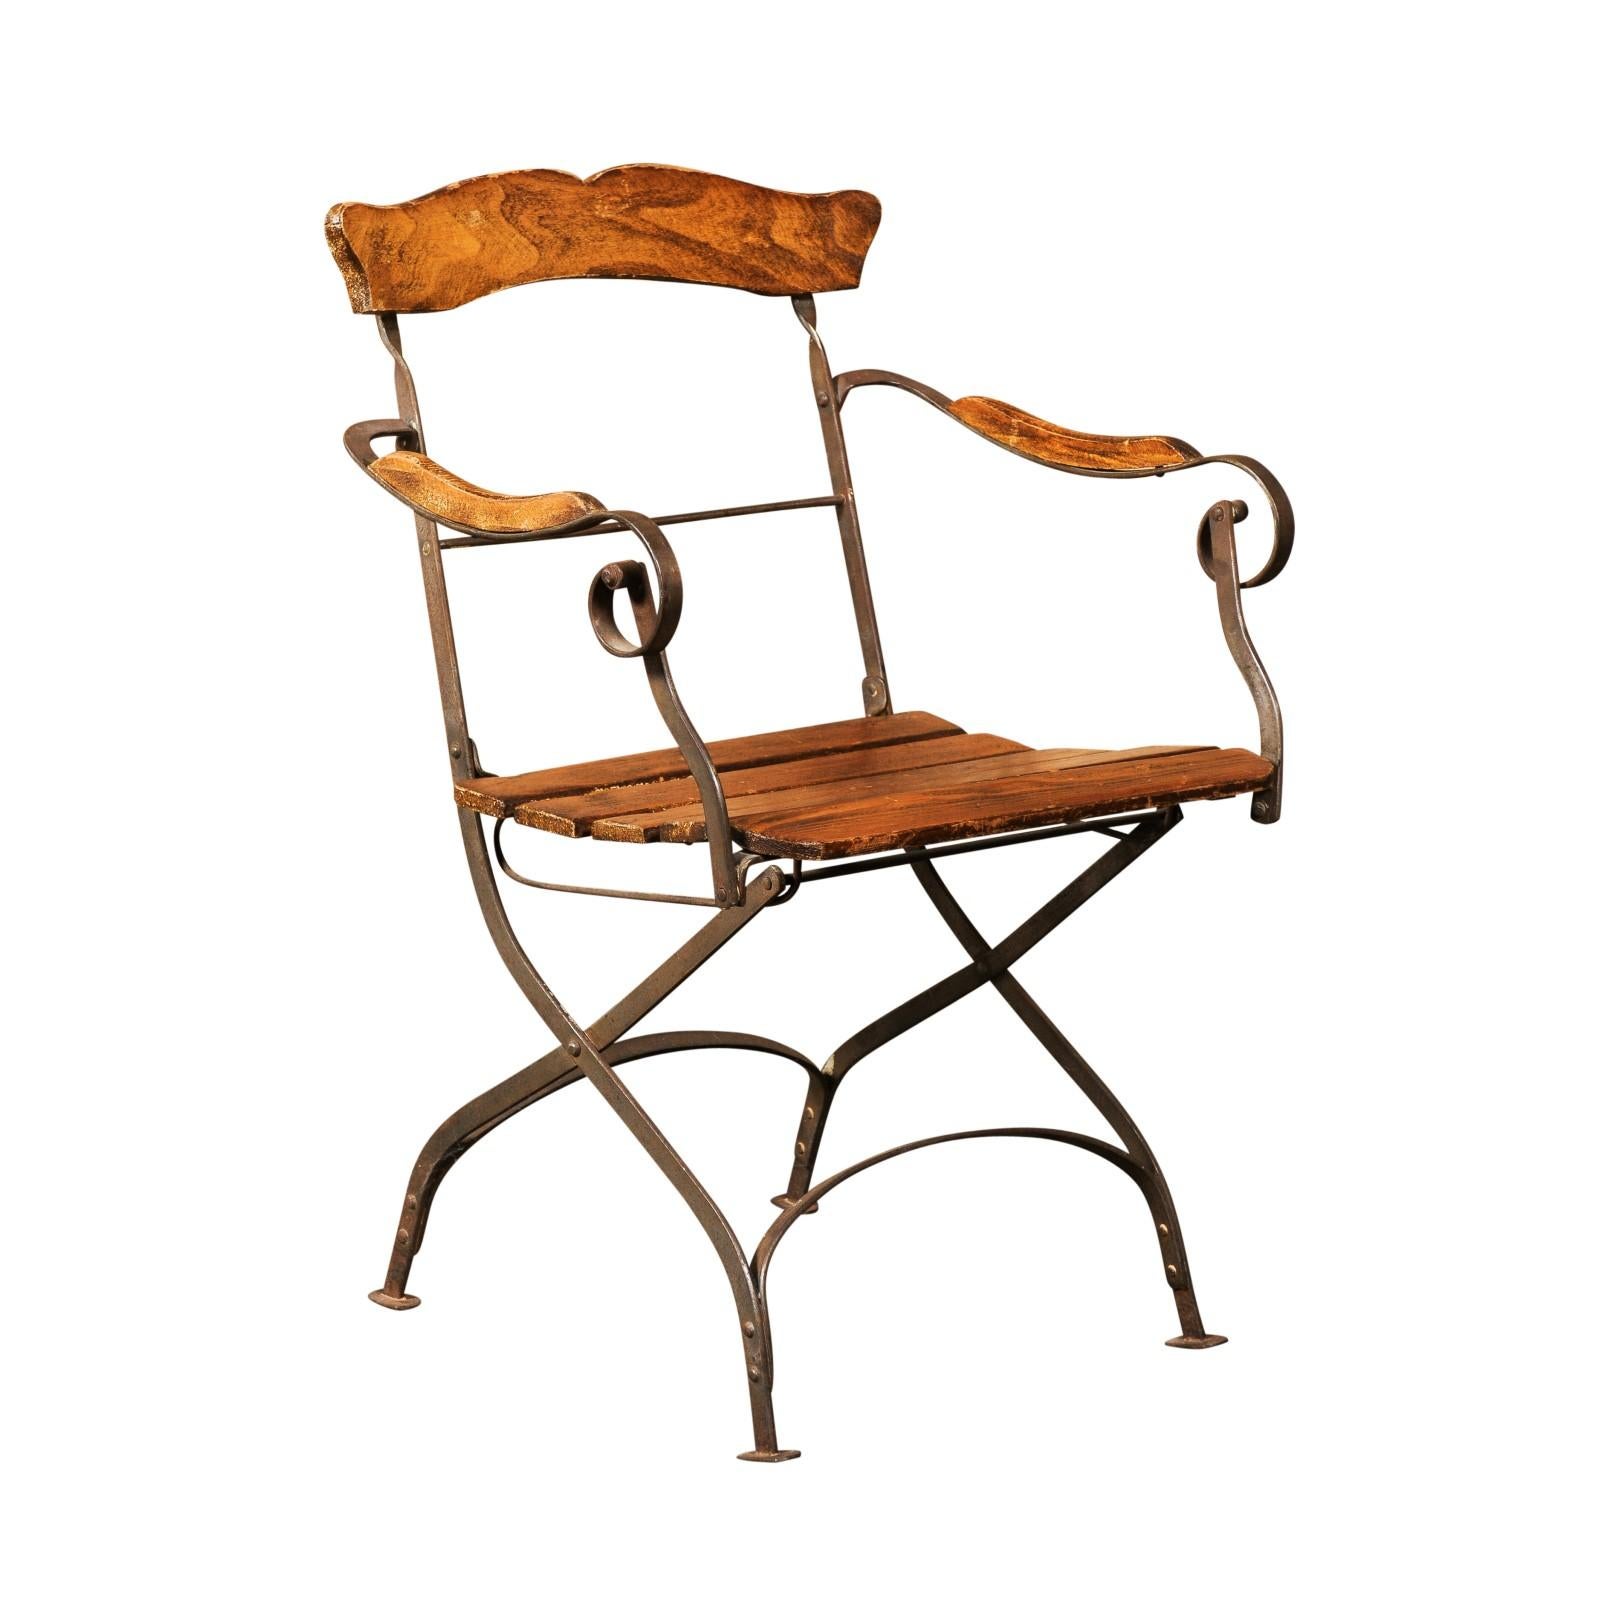 Rustic French 1870s Wood and Iron Garden Folding Chair with Scrolling Arms